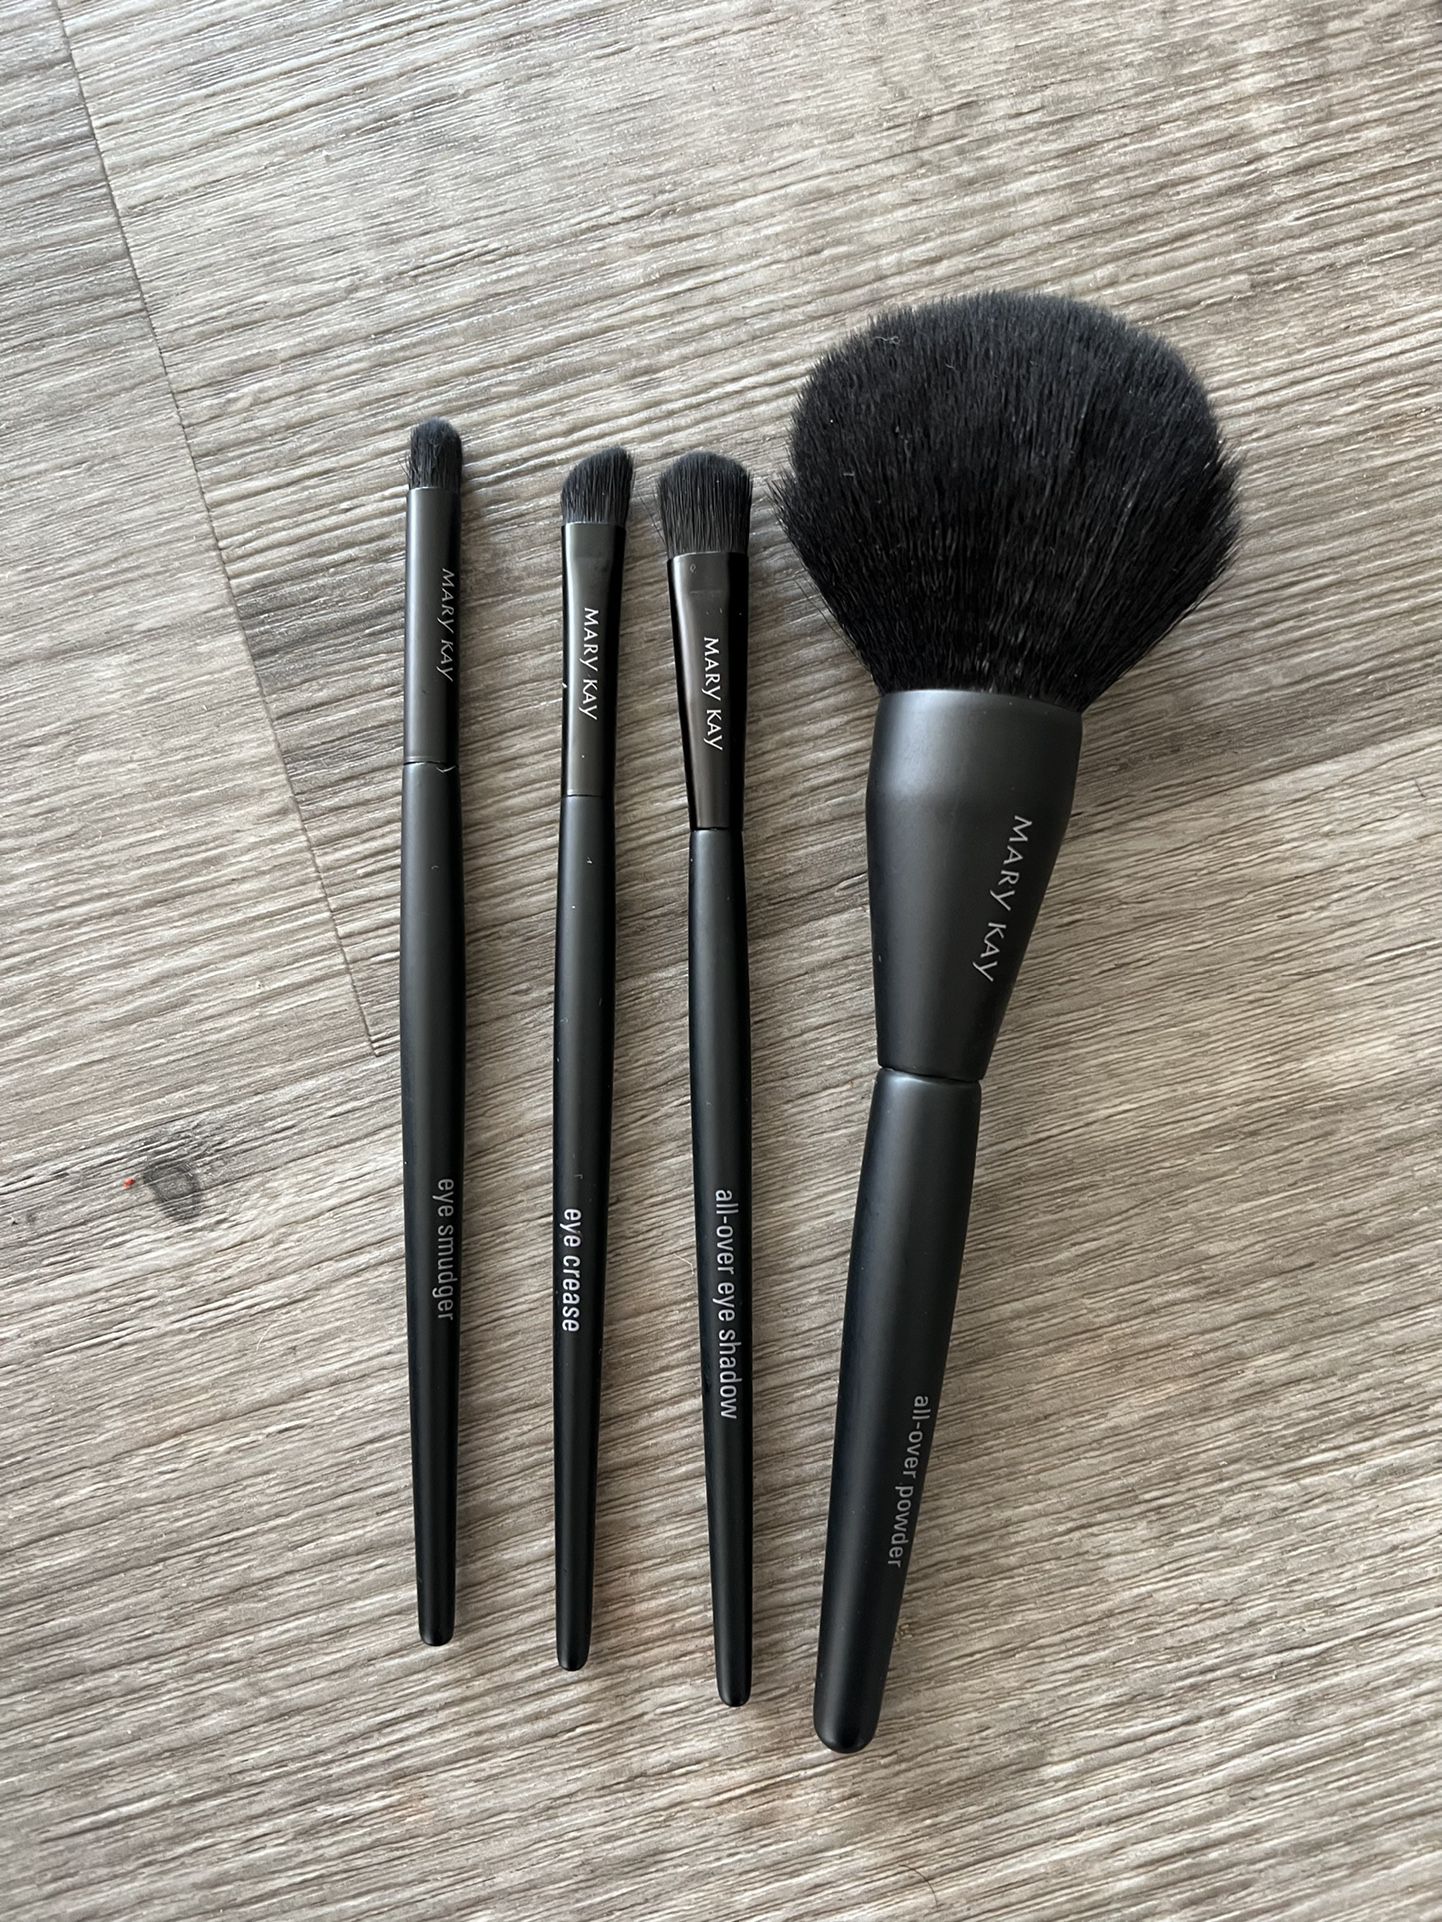 New, Set Of 4 Mary Kay Makeup Brushes